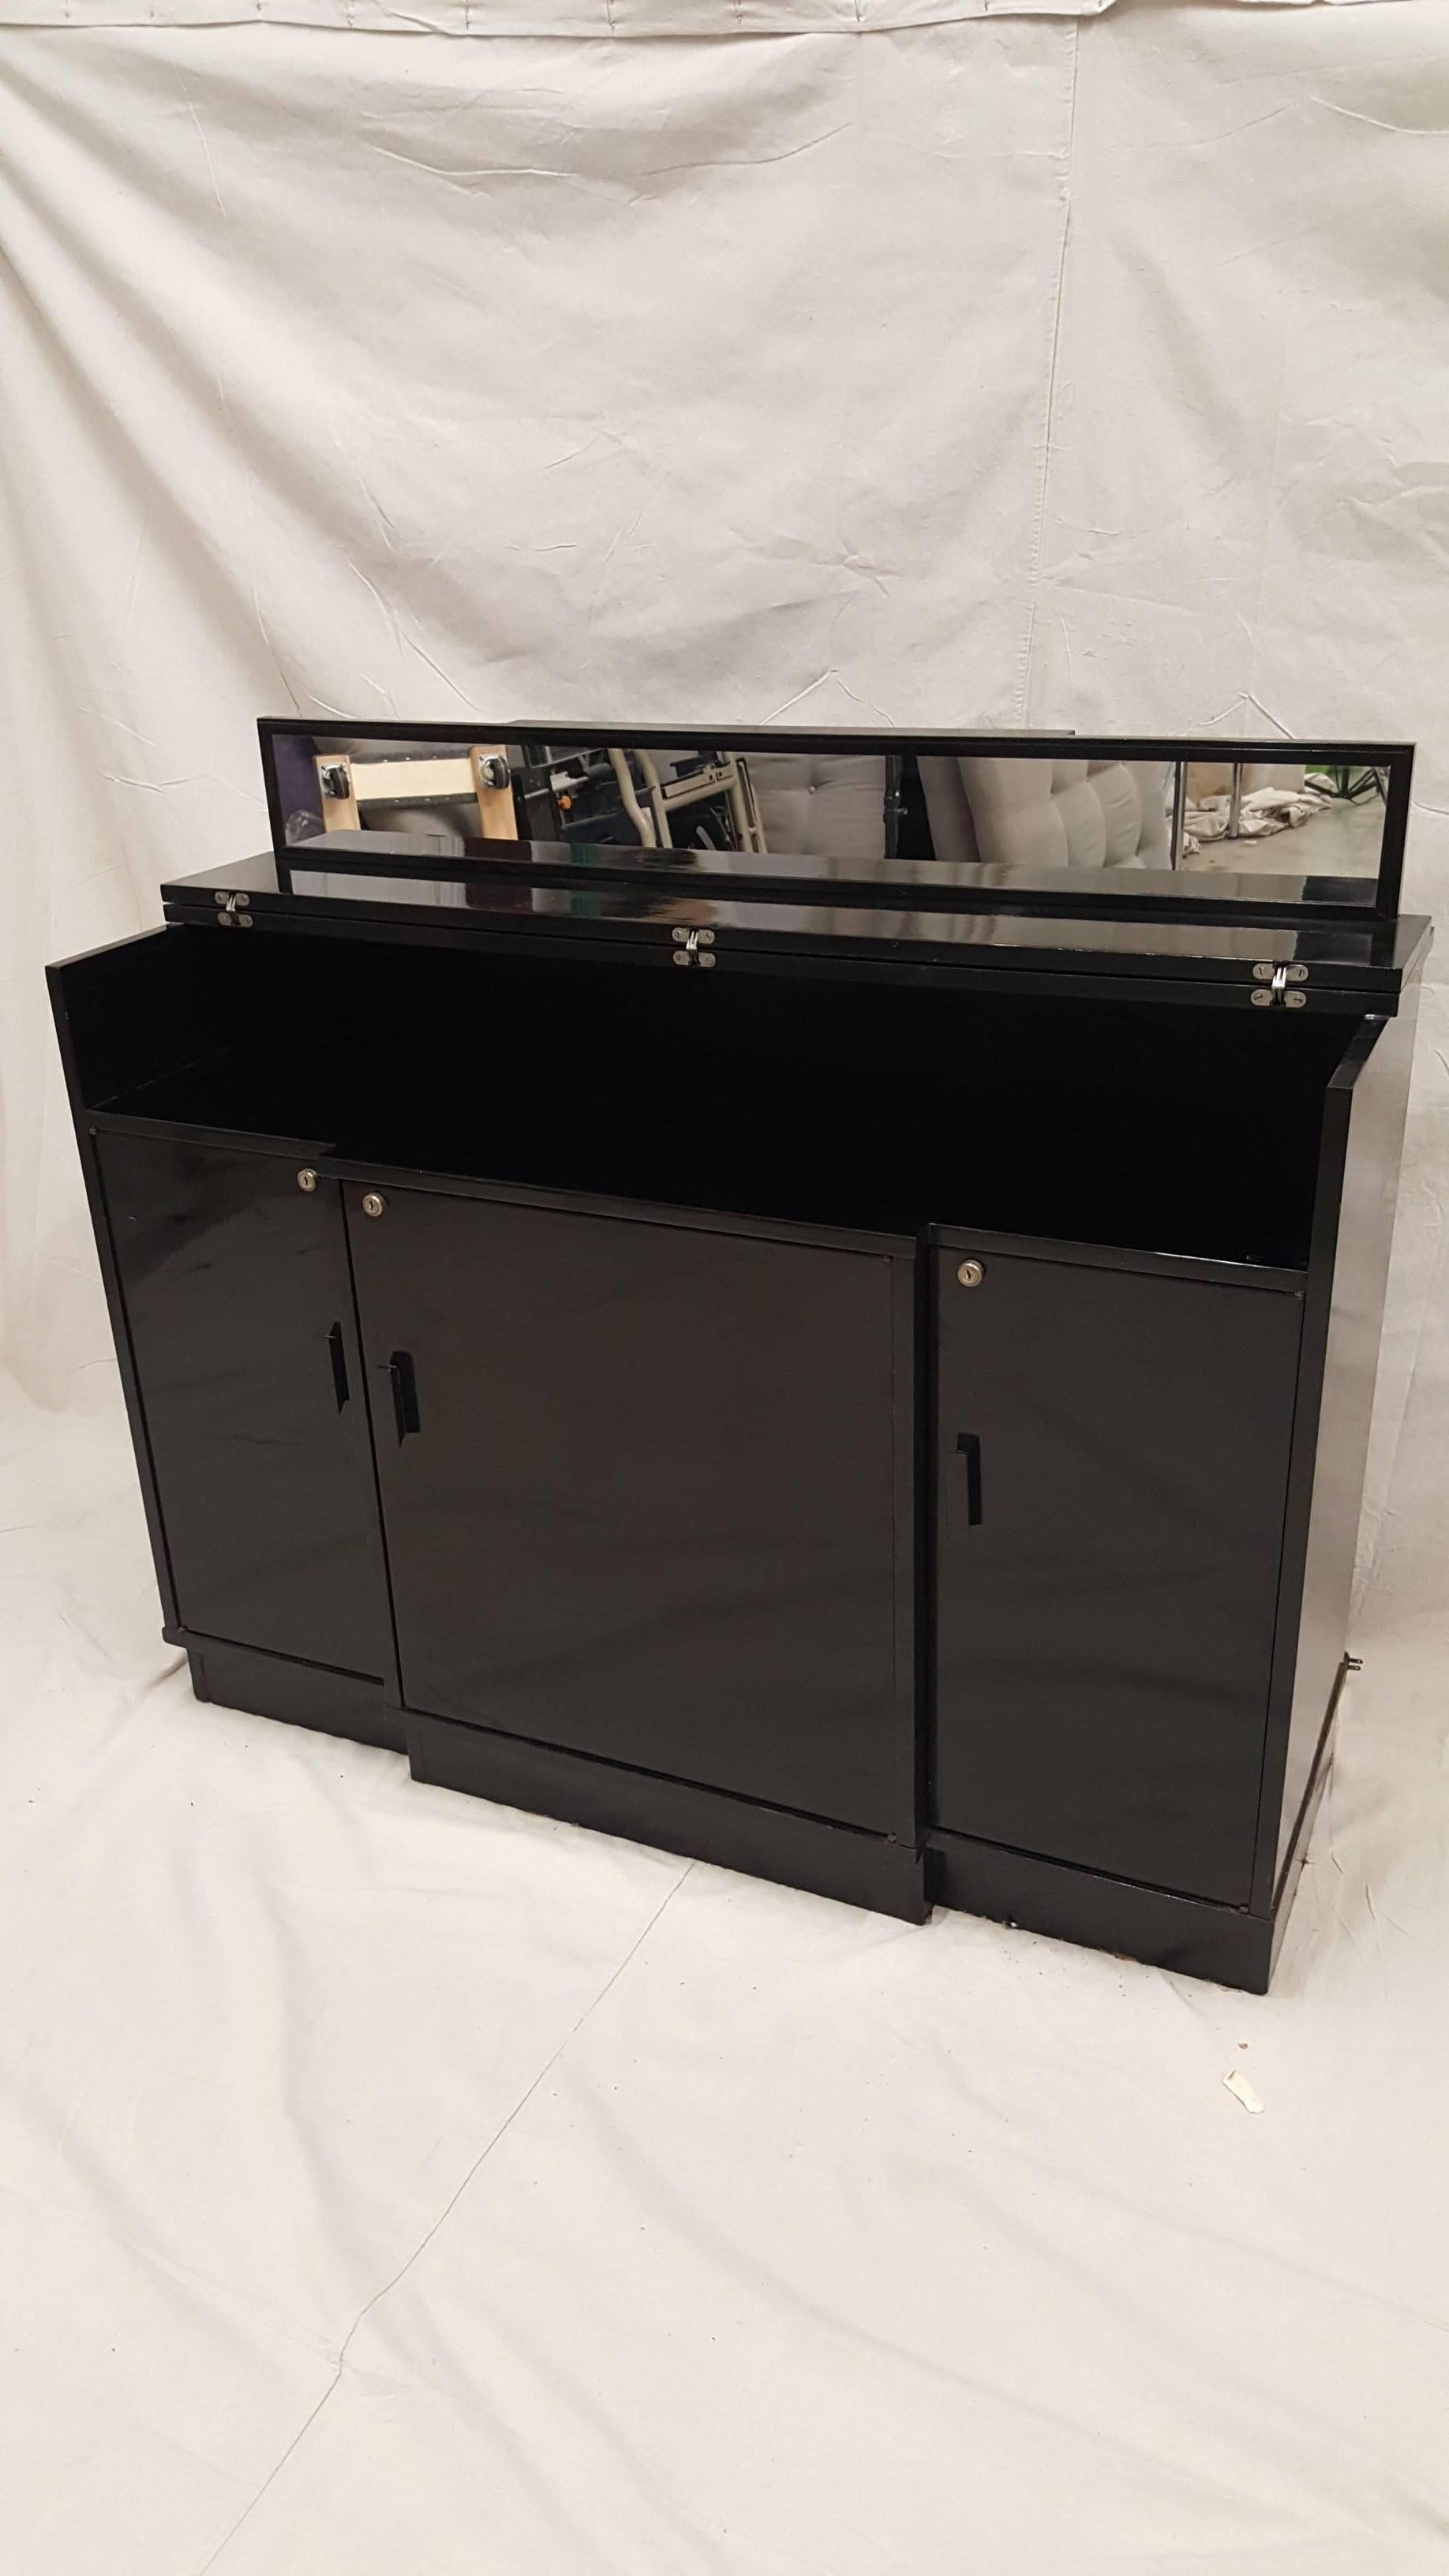 Extremely rare 1950s custom-made mini bar and cabinet, built in refrigerator and mini freezer. Rosewood veneer, lacquered with black enamel finish.  The refrigerator is still in working condition.  No keys come with the cabinet.